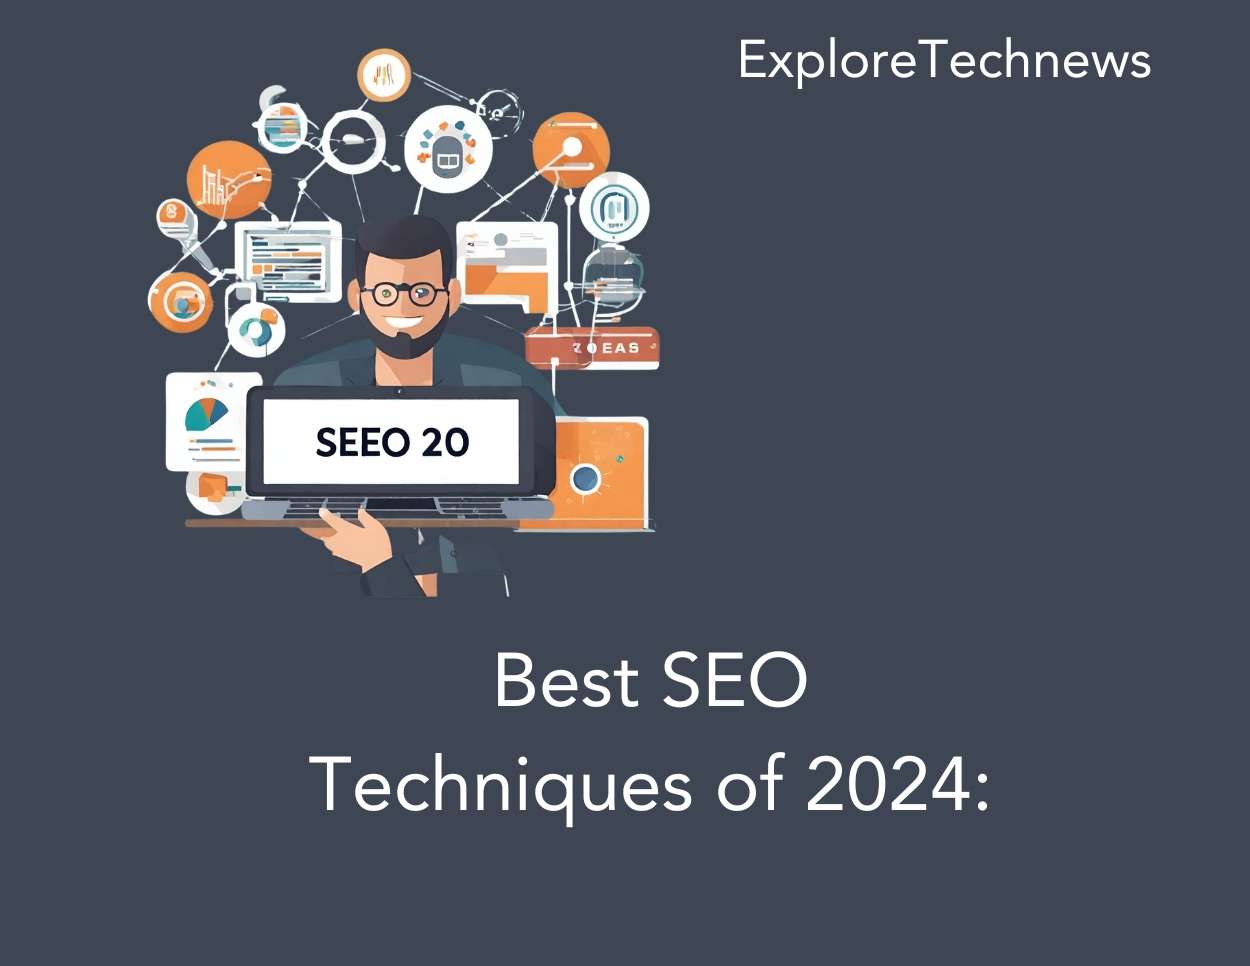 Best SEO Techniques of 2024: All The Facts and Figures